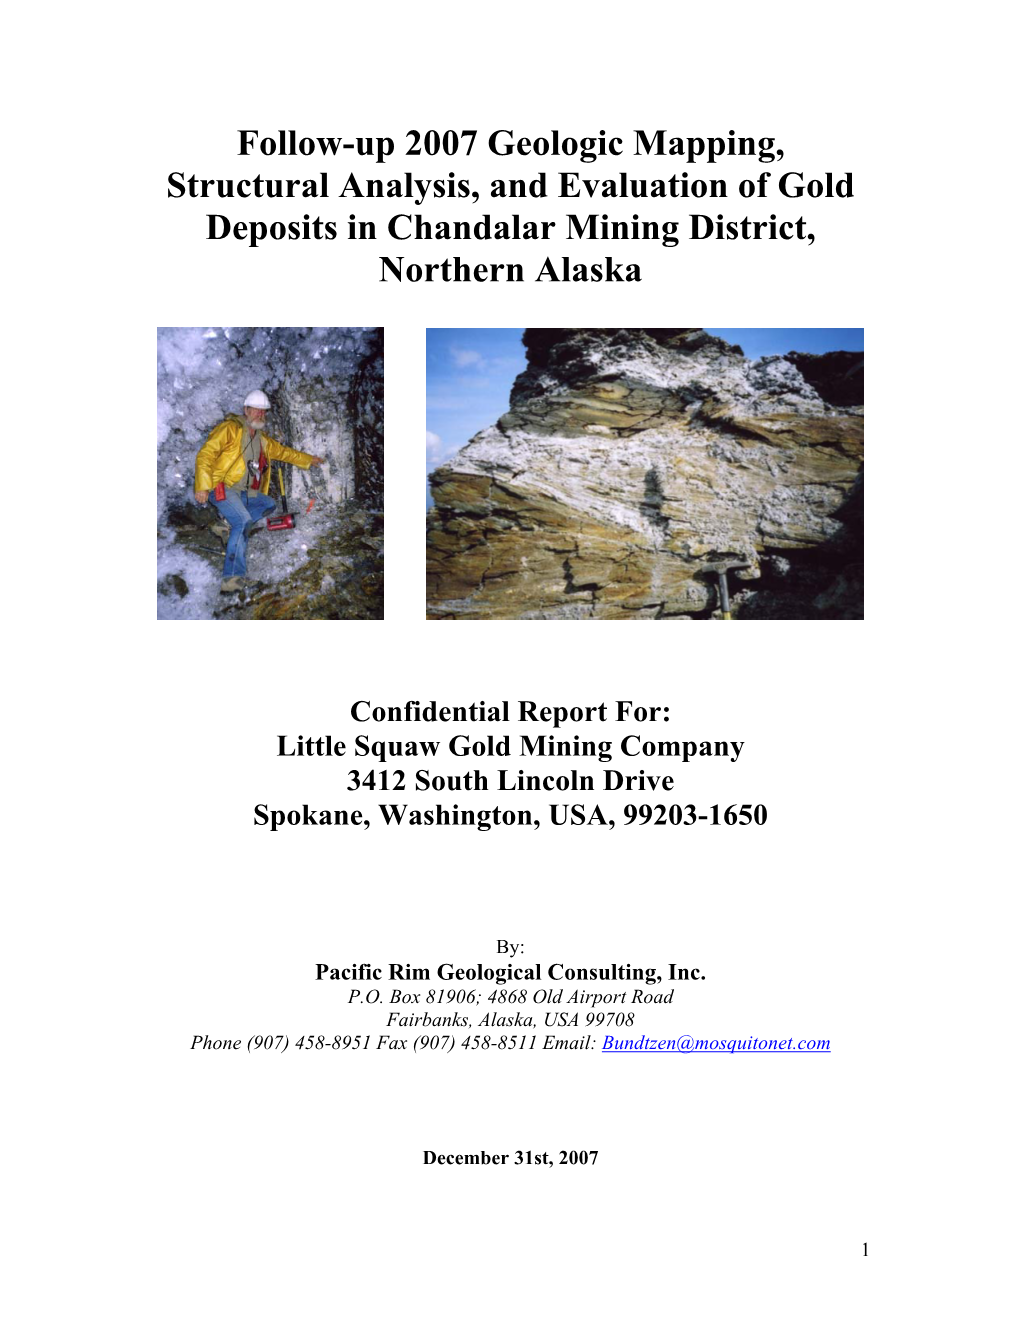 Follow-Up 2007 Geologic Mapping, Structural Analysis, and Evaluation of Gold Deposits in Chandalar Mining District, Northern Alaska